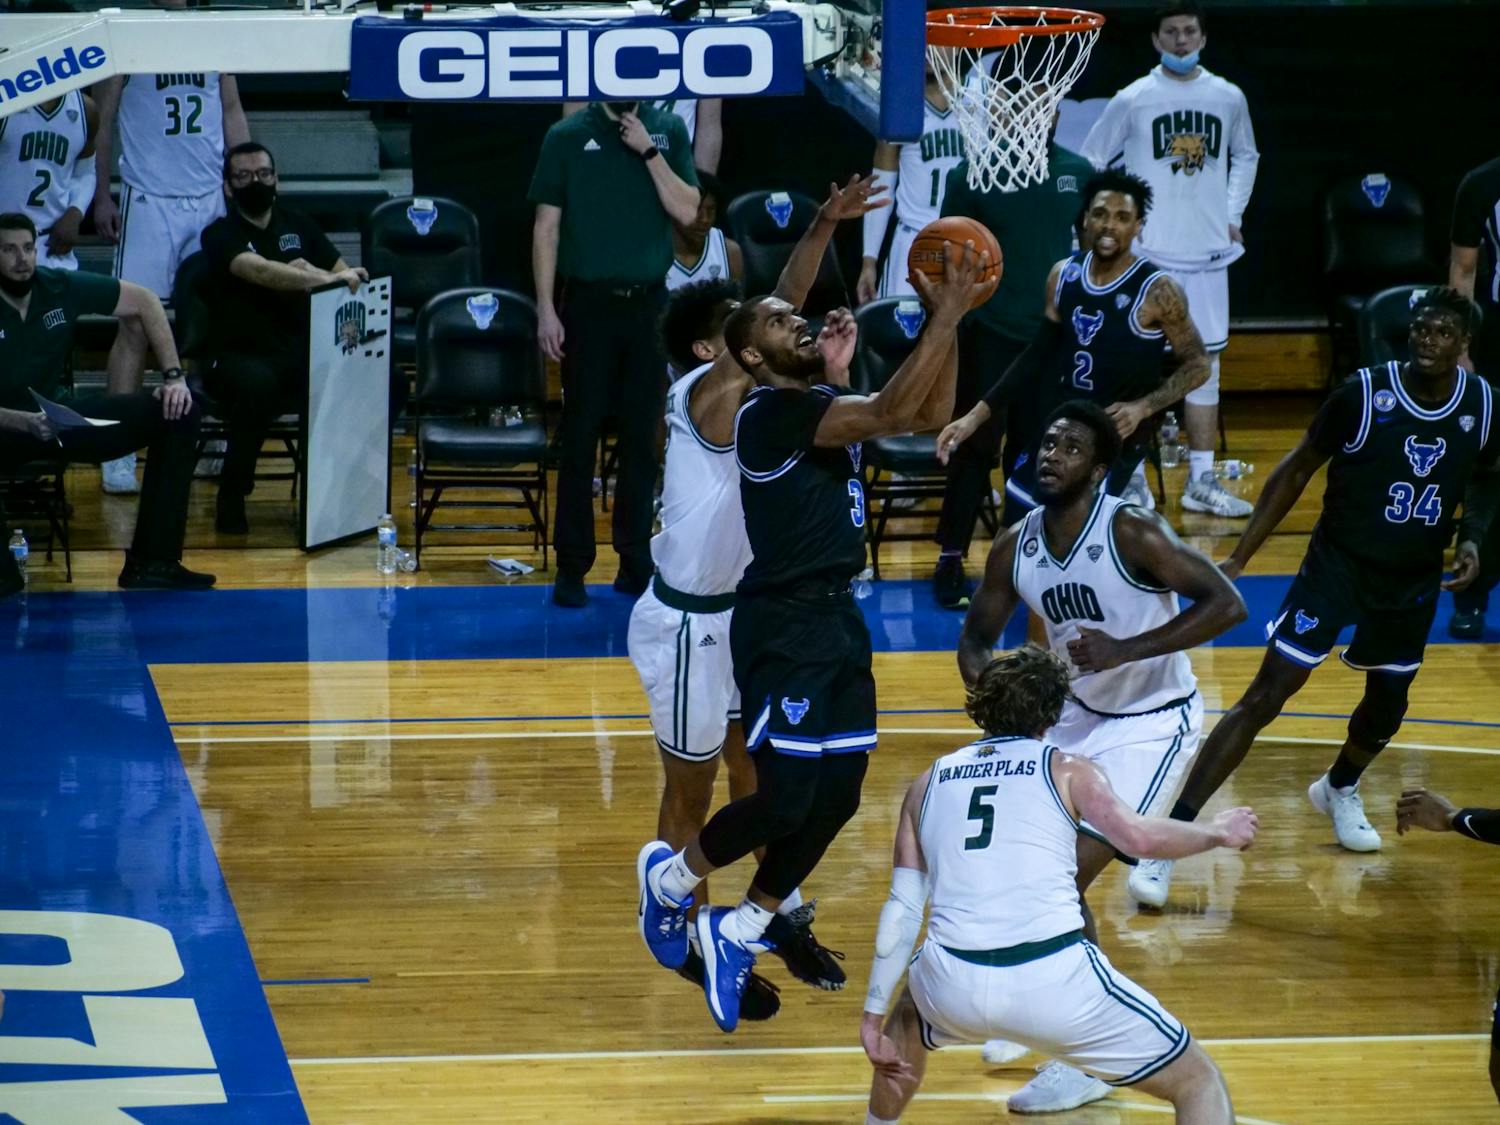 The Bulls’ NCAA Tournament hopes were dashed in an 84-69 season-ending loss to Ohio in the MAC Championship Game at the Rocket Mortgage FieldHouse in Cleveland Saturday.